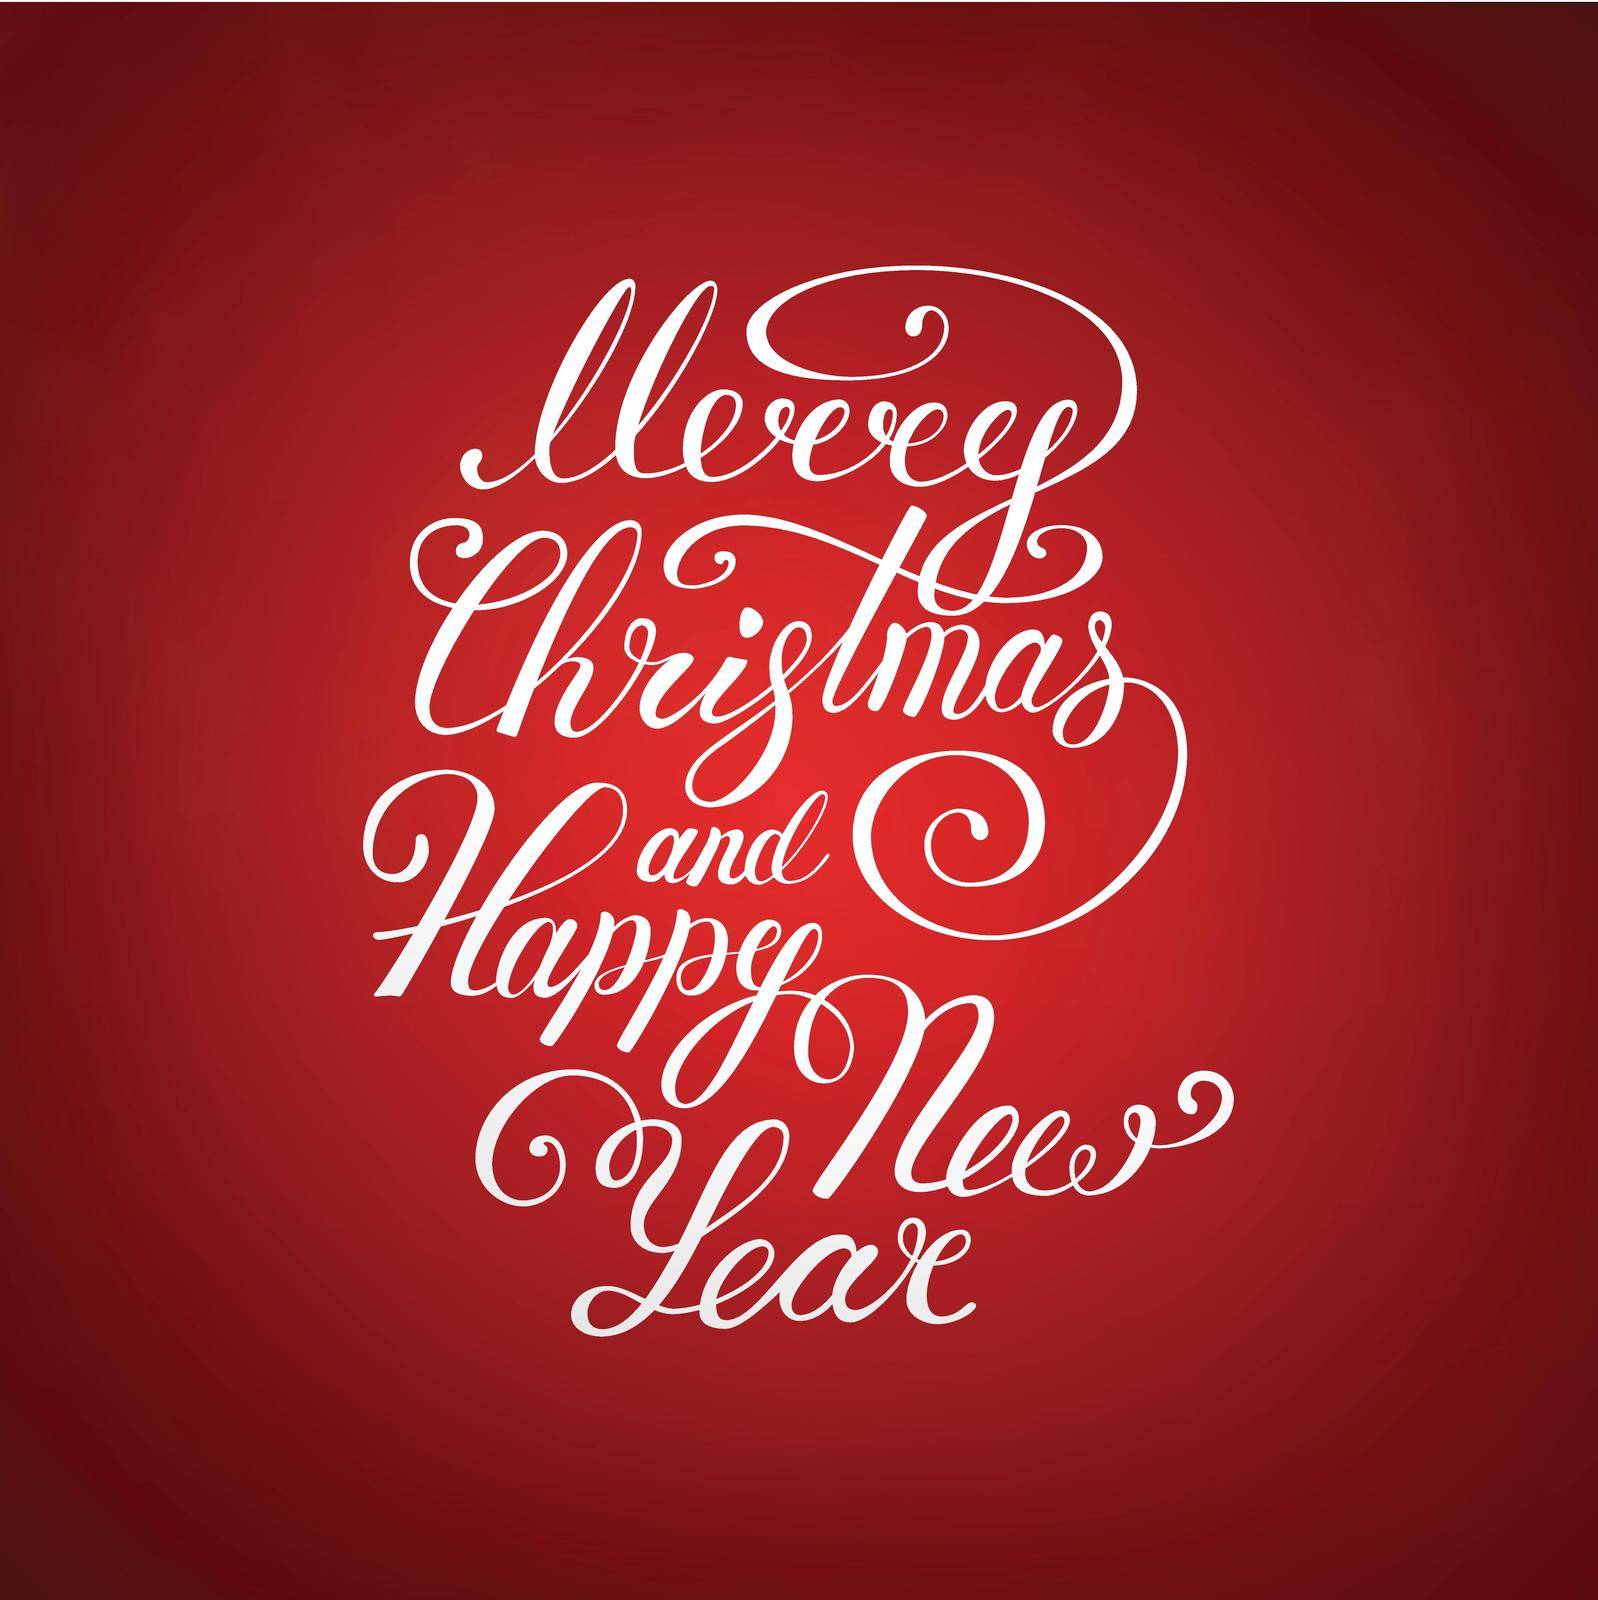 Merry Christmas Text .Happy New Year vector illustration lettering design EPS 10. Christmas